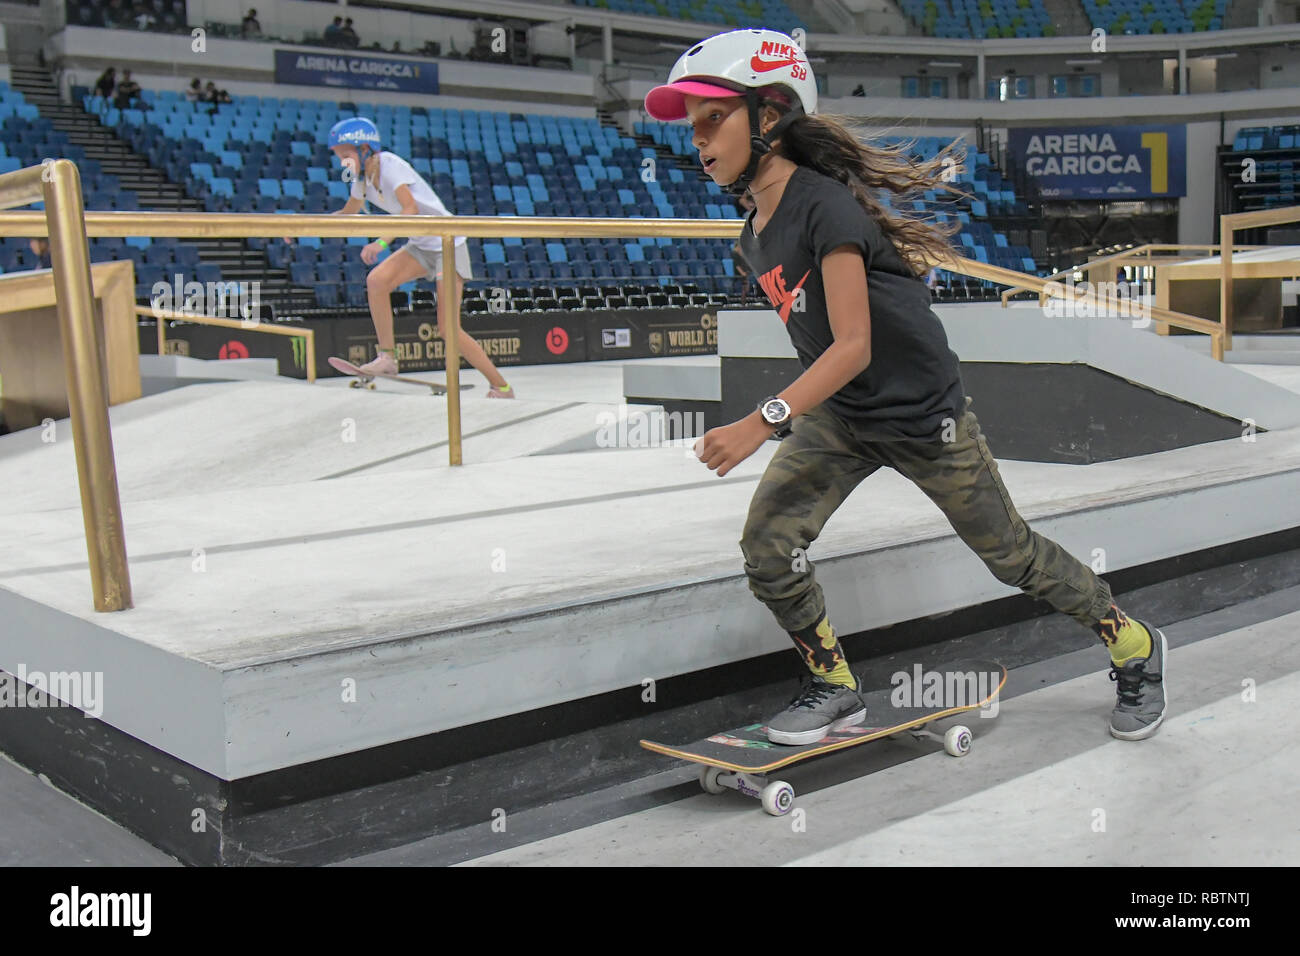 RJ - Rio de Janeiro - 11/01/2019 - SLS World Championship of World Skate in  Rio de Janeiro - Competitor performs maneuver during the training for  semifinalists women of the Brazilian stage